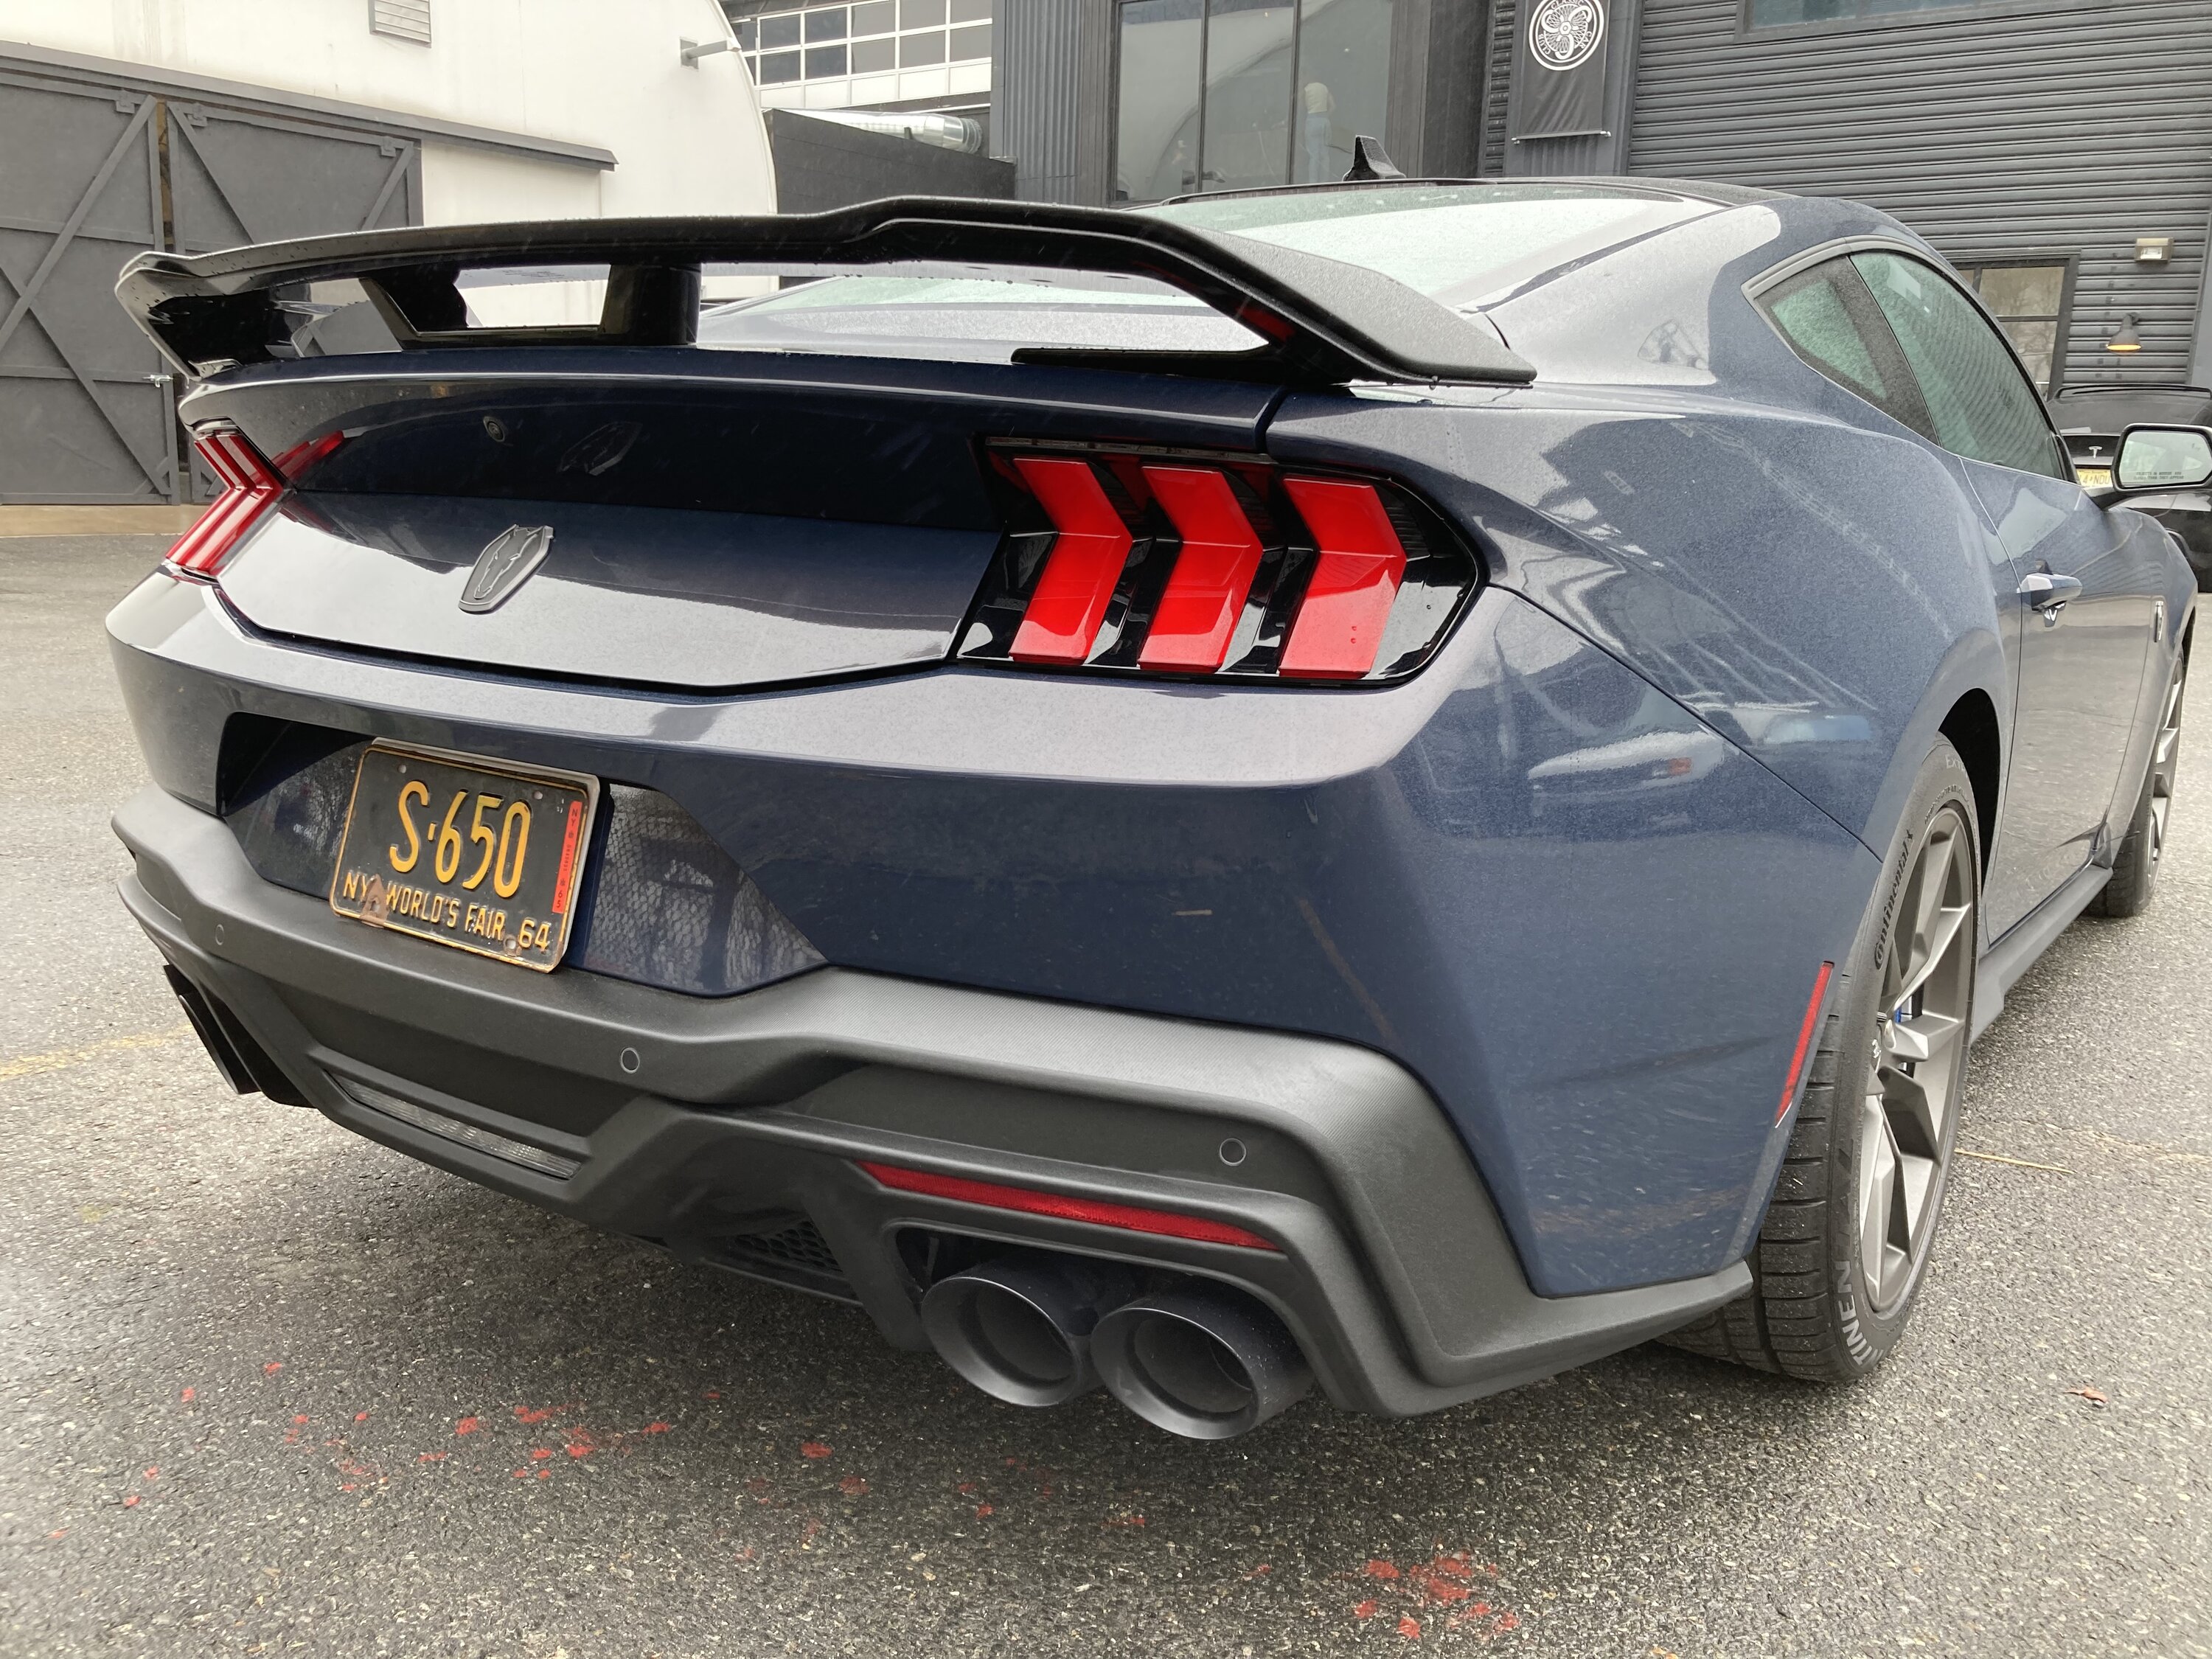 S650 Mustang S650 plate A55C1AB1-382F-4F01-A0F7-358F7495FDEA